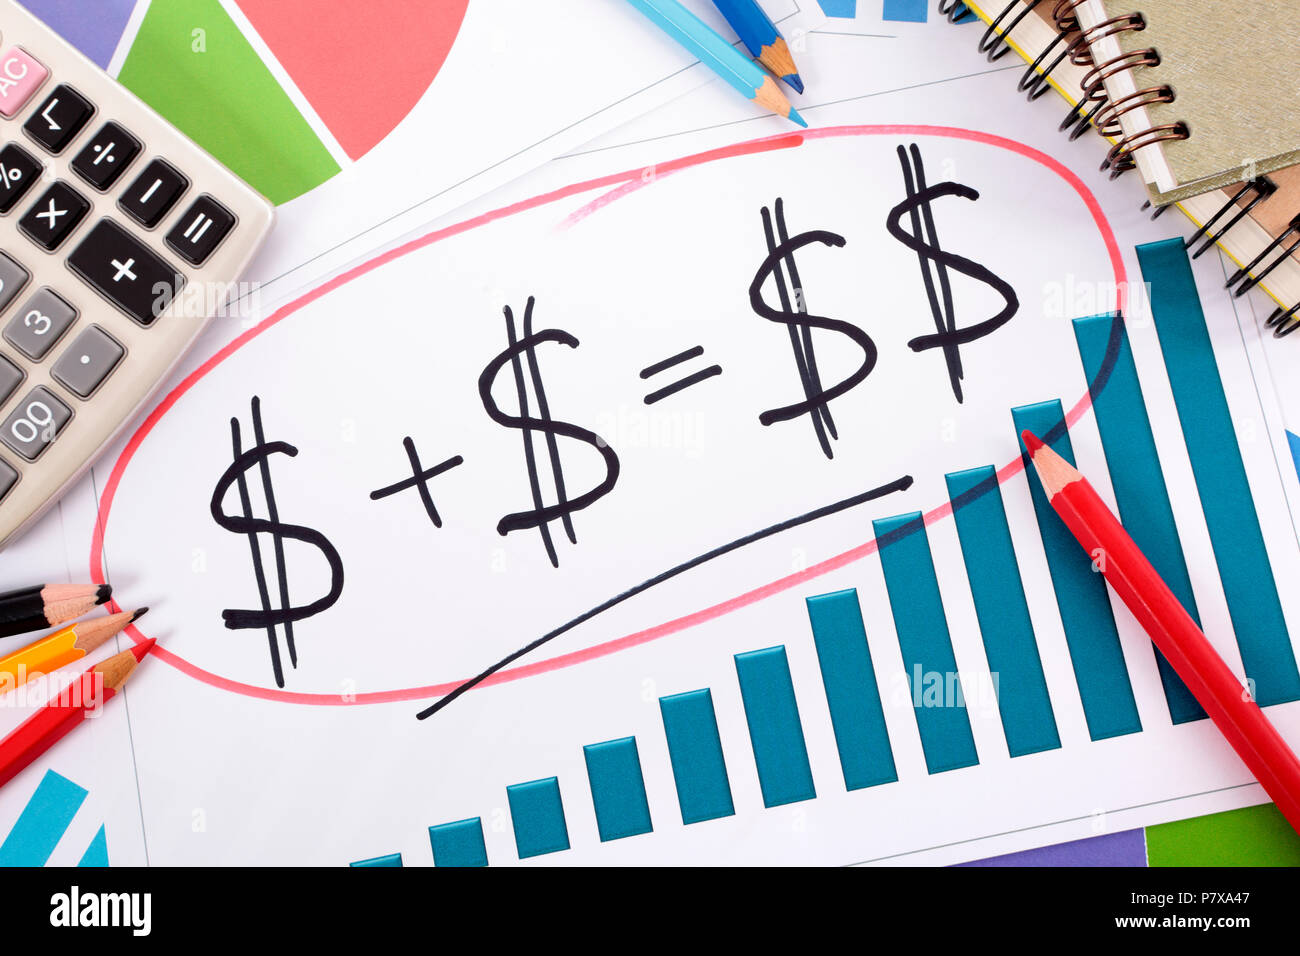 Simple savings or retirement formula on bar graph surrounded by calculator,  books and pencils Stock Photo - Alamy